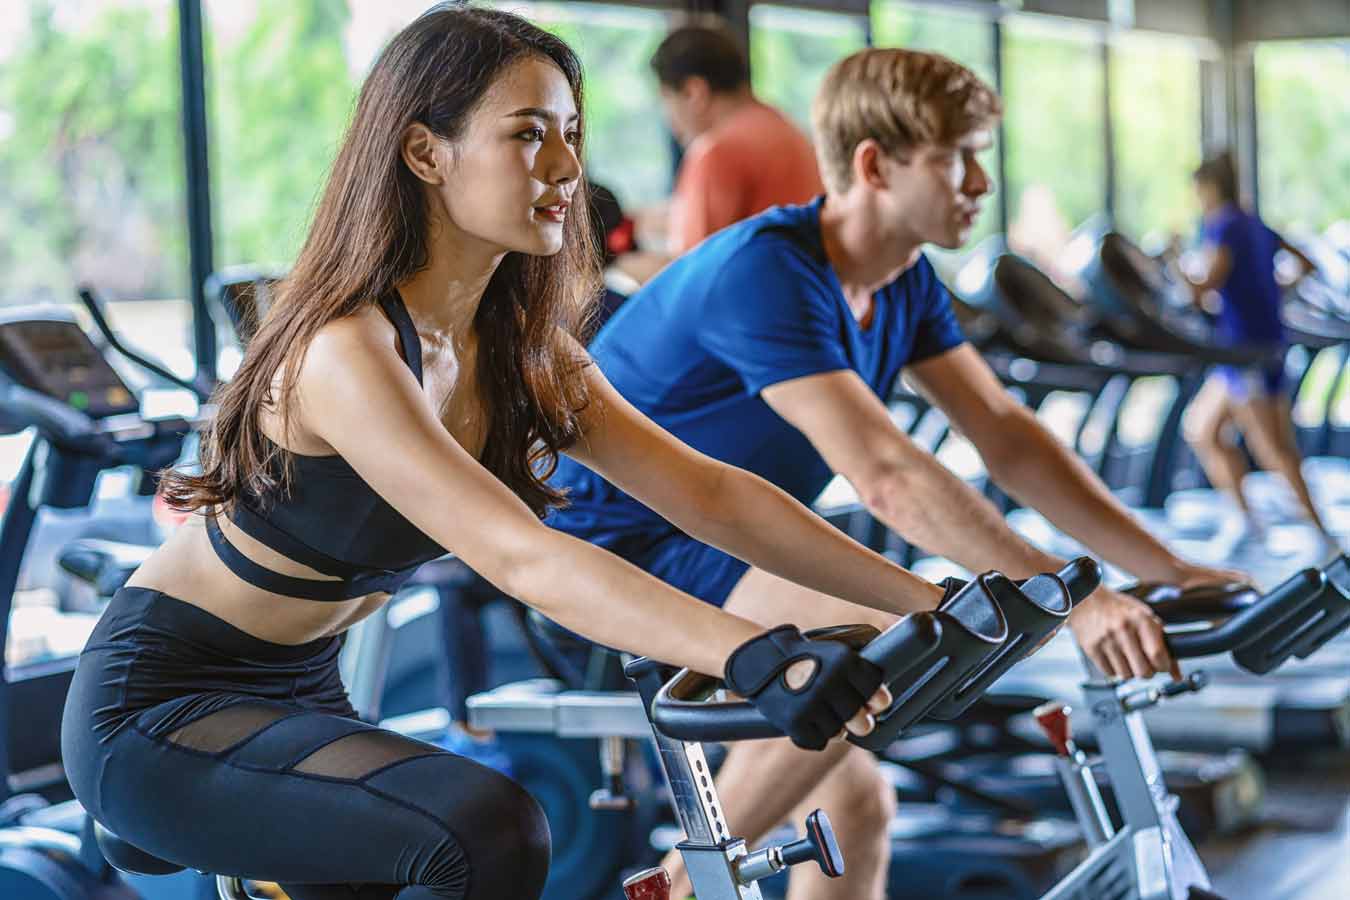 6 Tips To Make Your New Year’s Fitness Resolution Stick